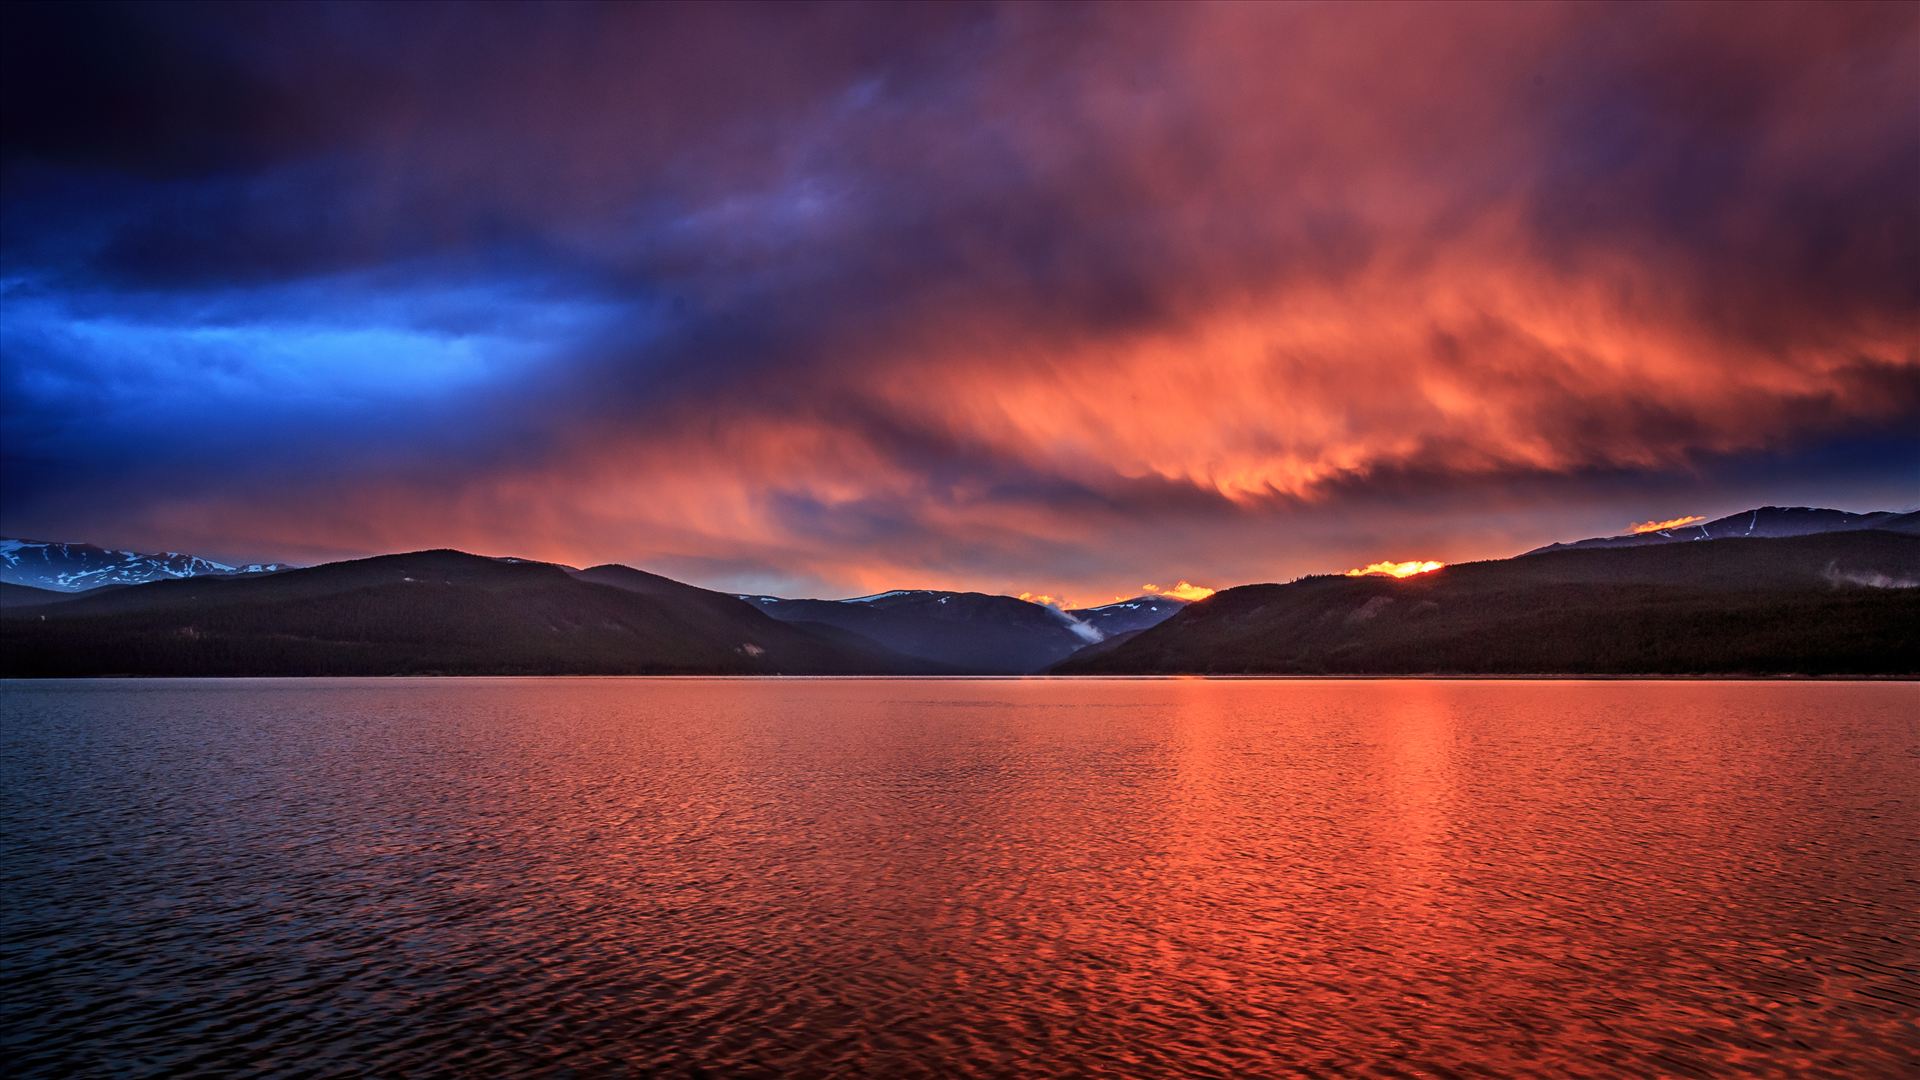 Sunset on Turquoise II Sunset on the calm protected waters of Turqouise Lake, Leadville Colorado. by Scott Smith Photos